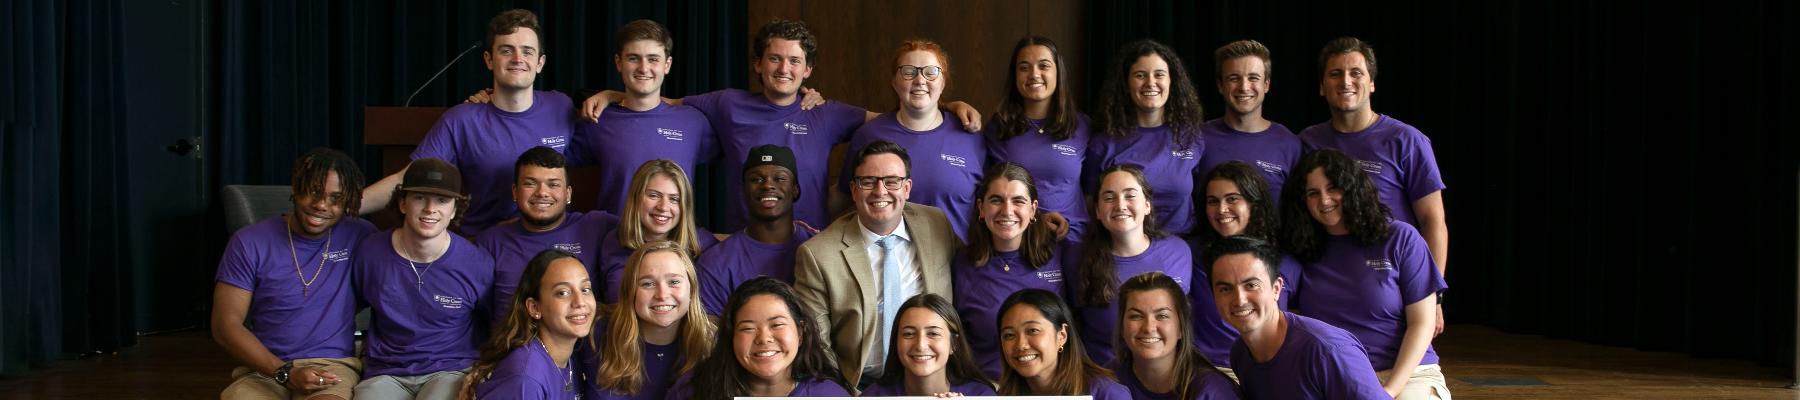 Group of 26 smiling students with purple Holy Cross shirts and khaki shorts/pants on posing for a picture